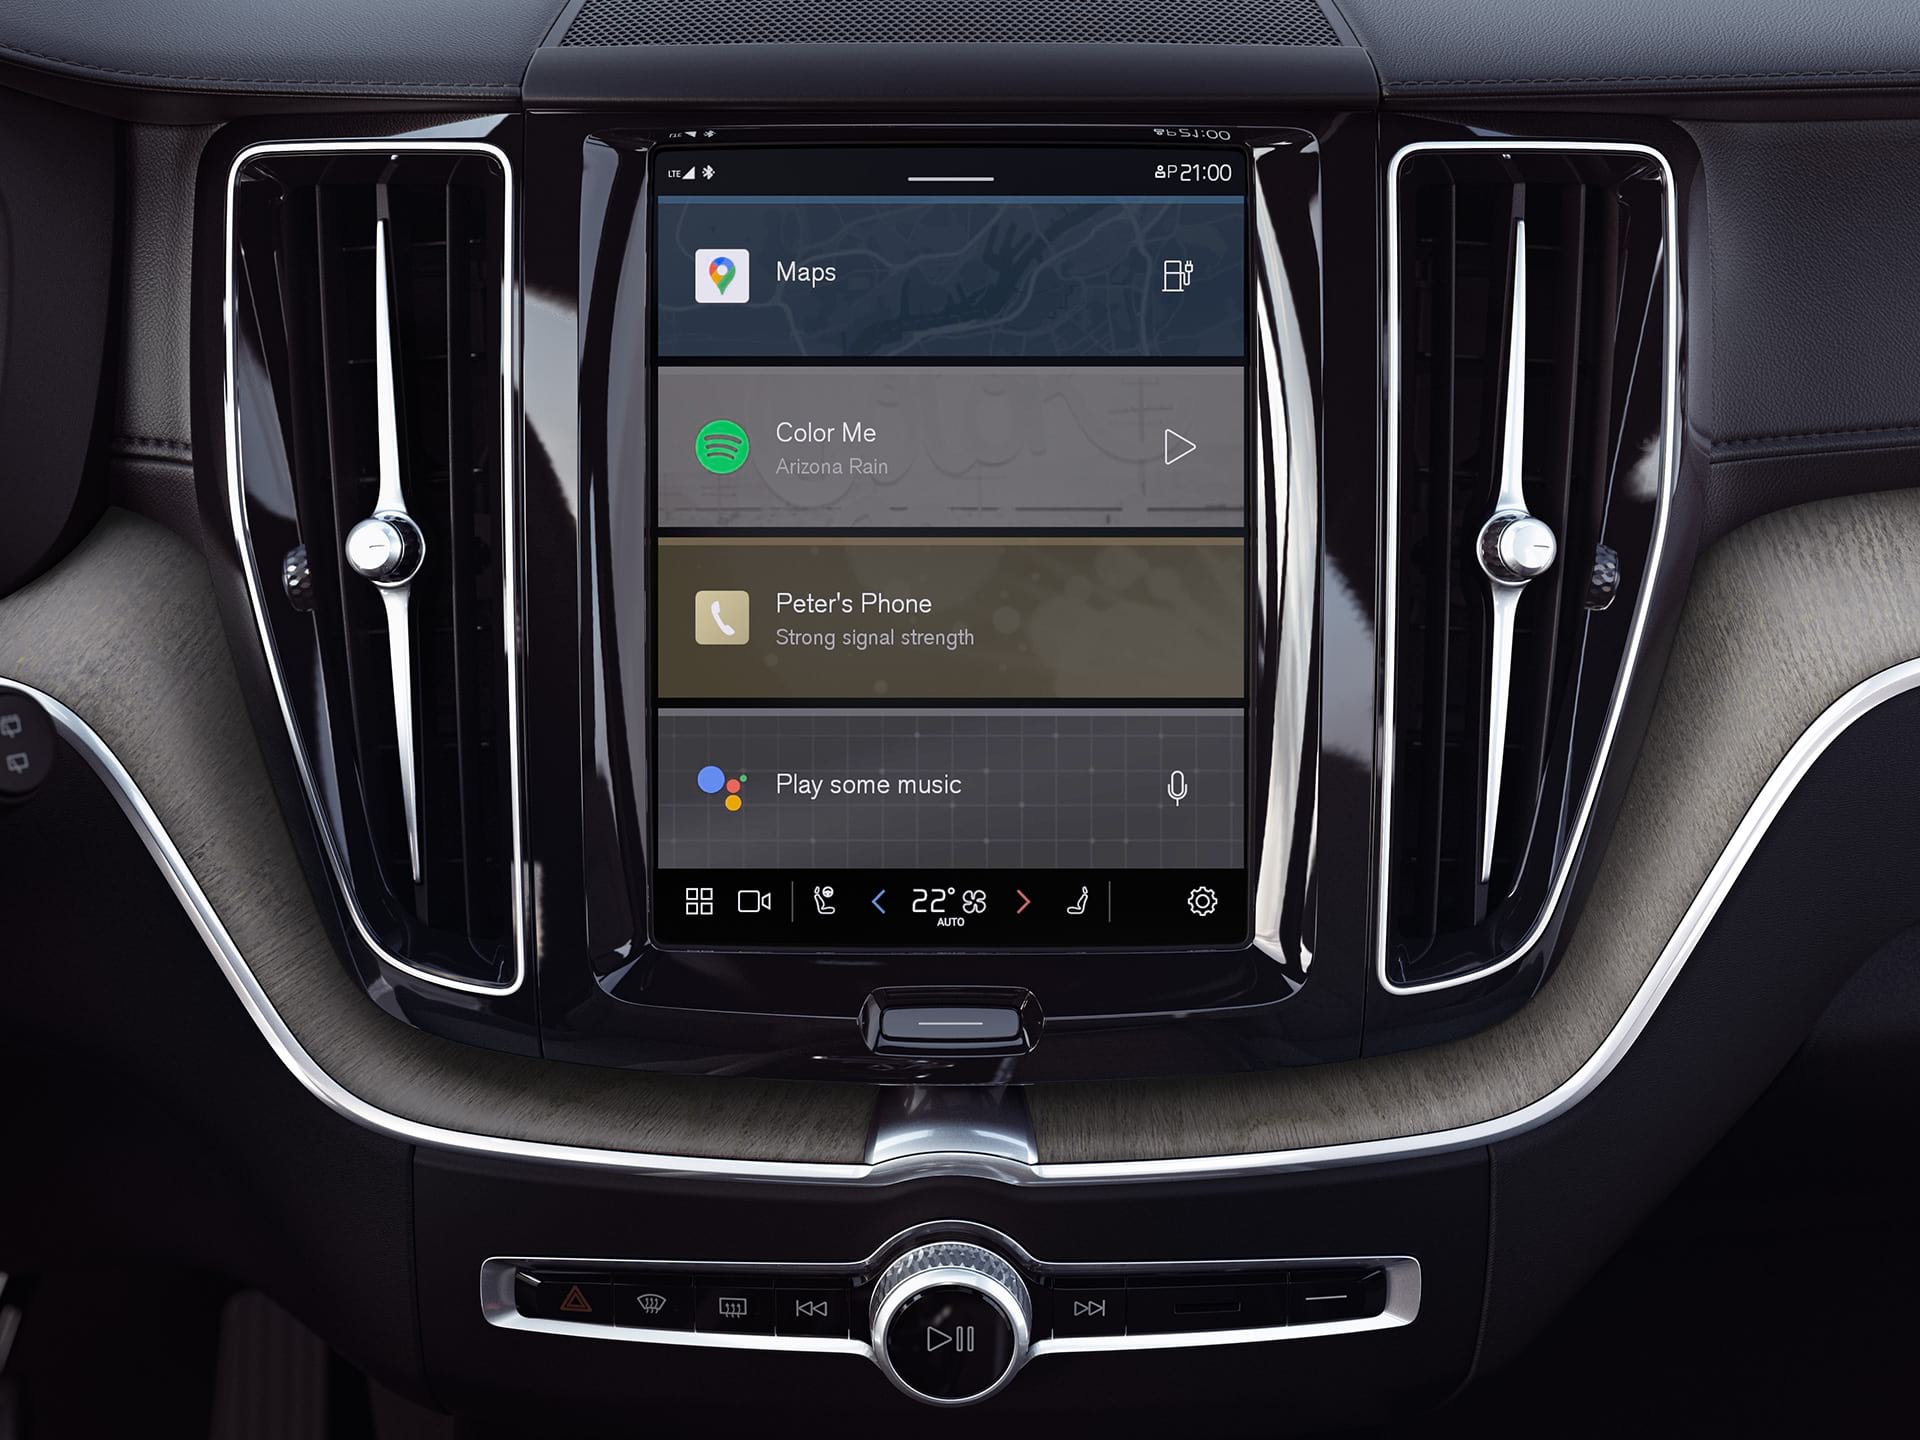 Centre console in a Volvo SUV showing the built in Google infotainment system. 